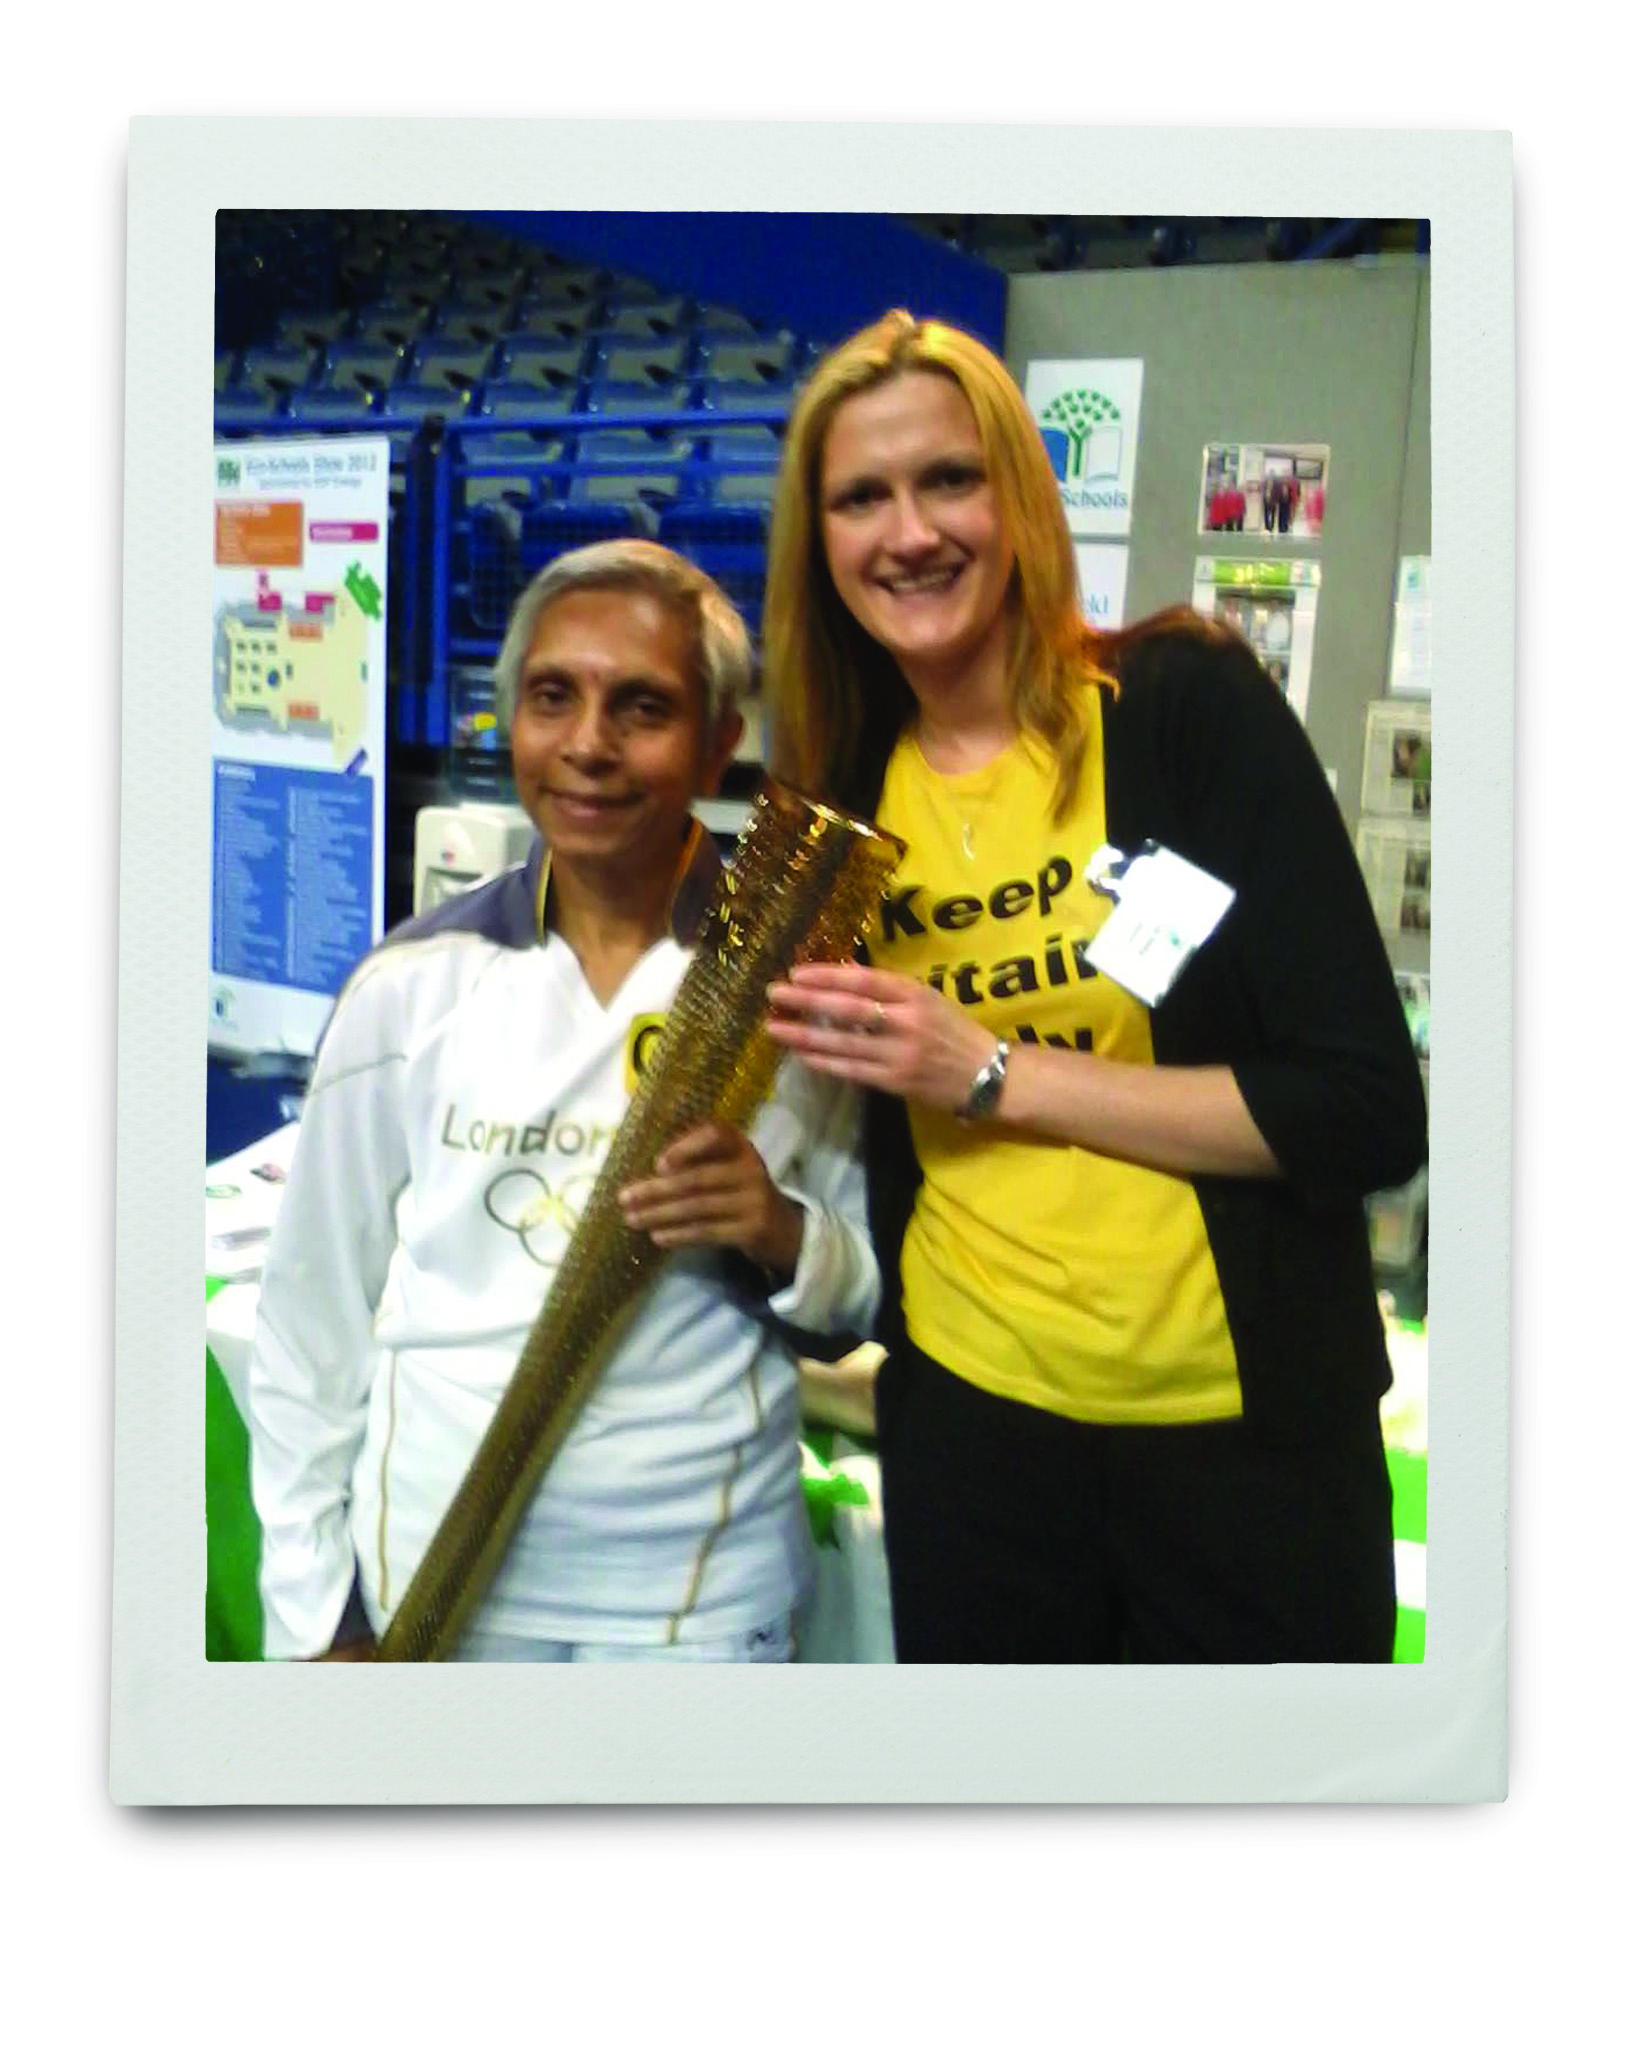 An image of a Keep Britain Tidy volunteer with someone carrying the Olympic torch 